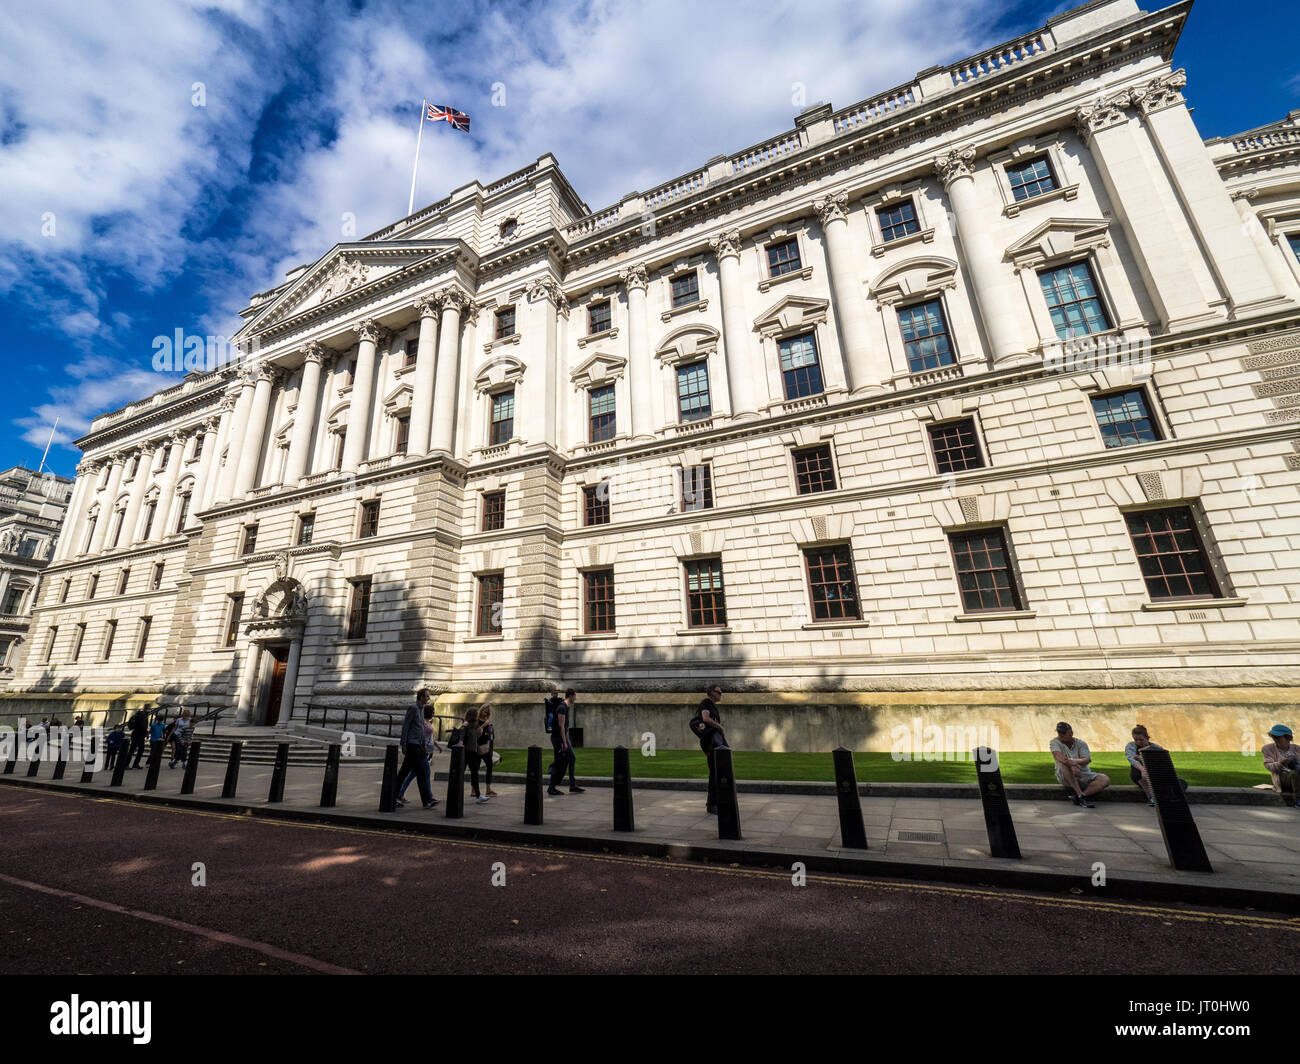 HM Treasury office in Horse Guards Rd, Westminster, London, UK. The Treasury controls and co-ordinates UK Government Spending Stock Photo